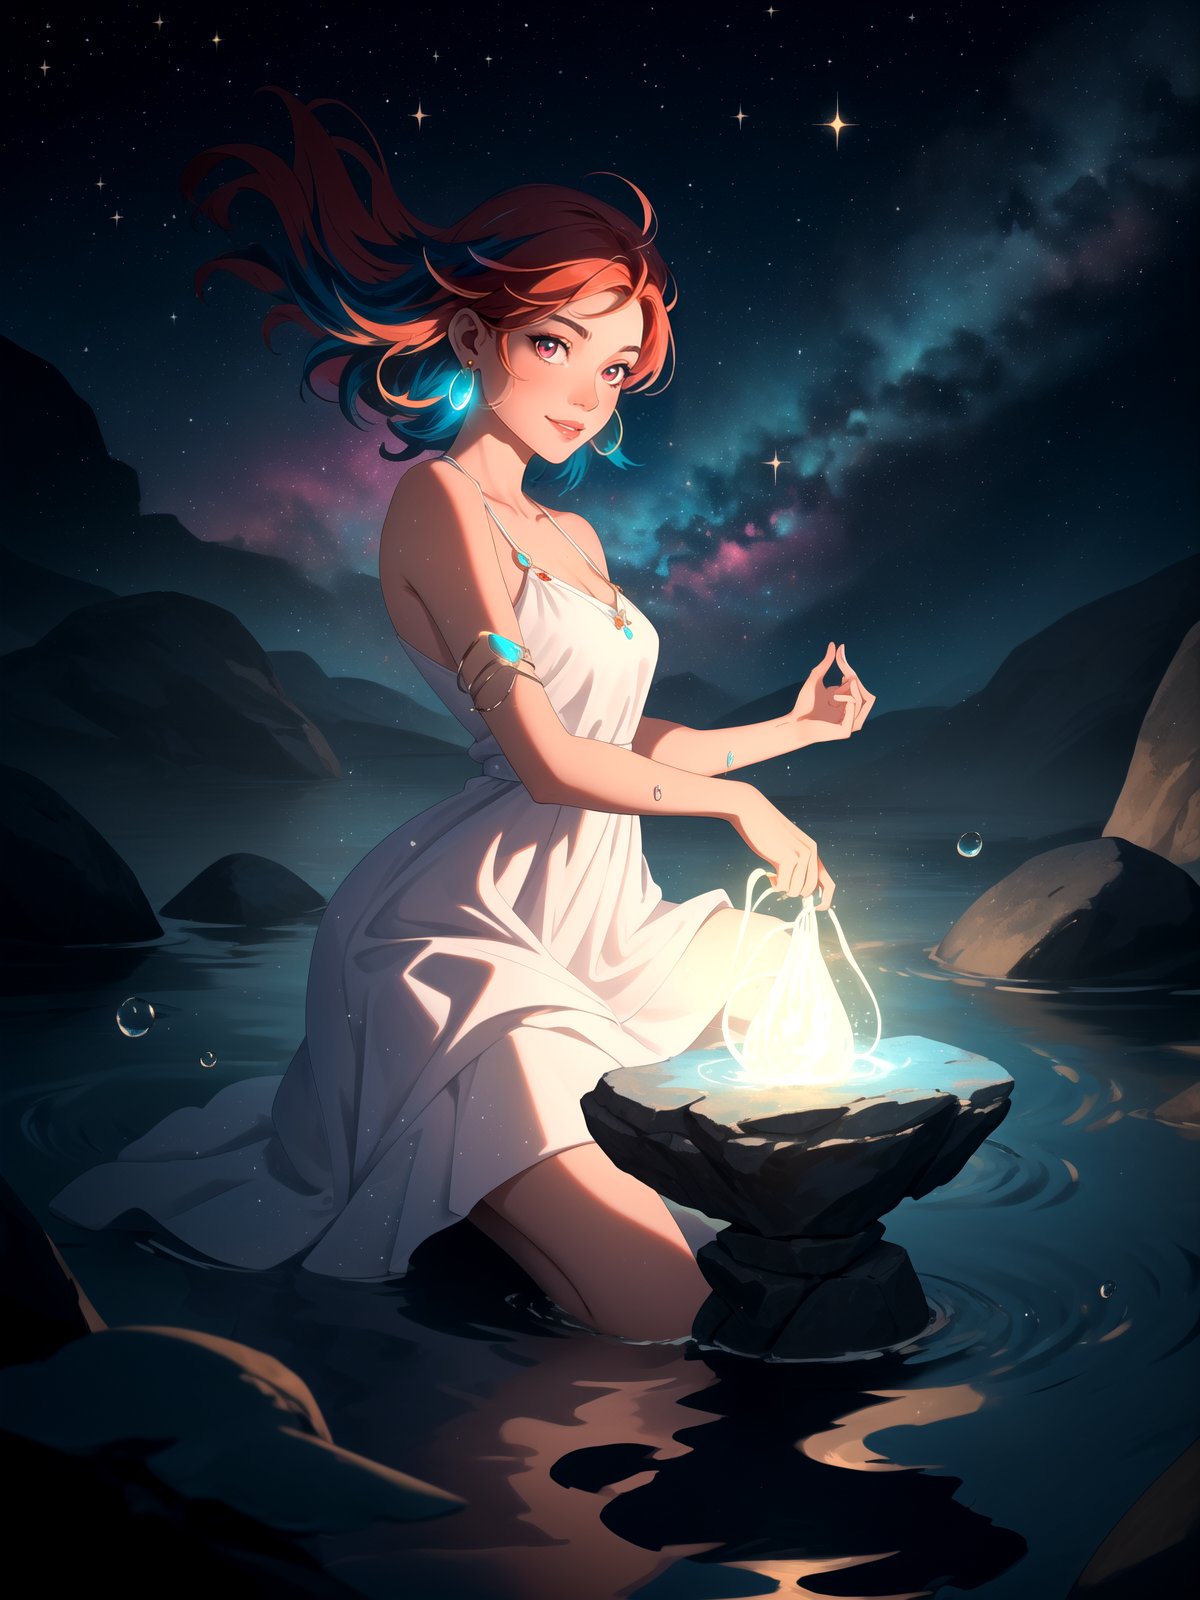 ((masterpiece, best quality, highres:1.2)),meditation,full shot,close-up,centered,1girl,she is in a serene meditative pose,looking at viewer,mystical,magical,glow, glowing, young, ((multicolored hair)), flowing hair, long hair, glossy lips, small smile, glowing multicolored eyes, looking at the camera,dual tone light source,colorful set, back light, make up, glow sparkle, light summer dress, wite dress, water drops in skin, magic particles, glowing water, earrings,starry, toxic.